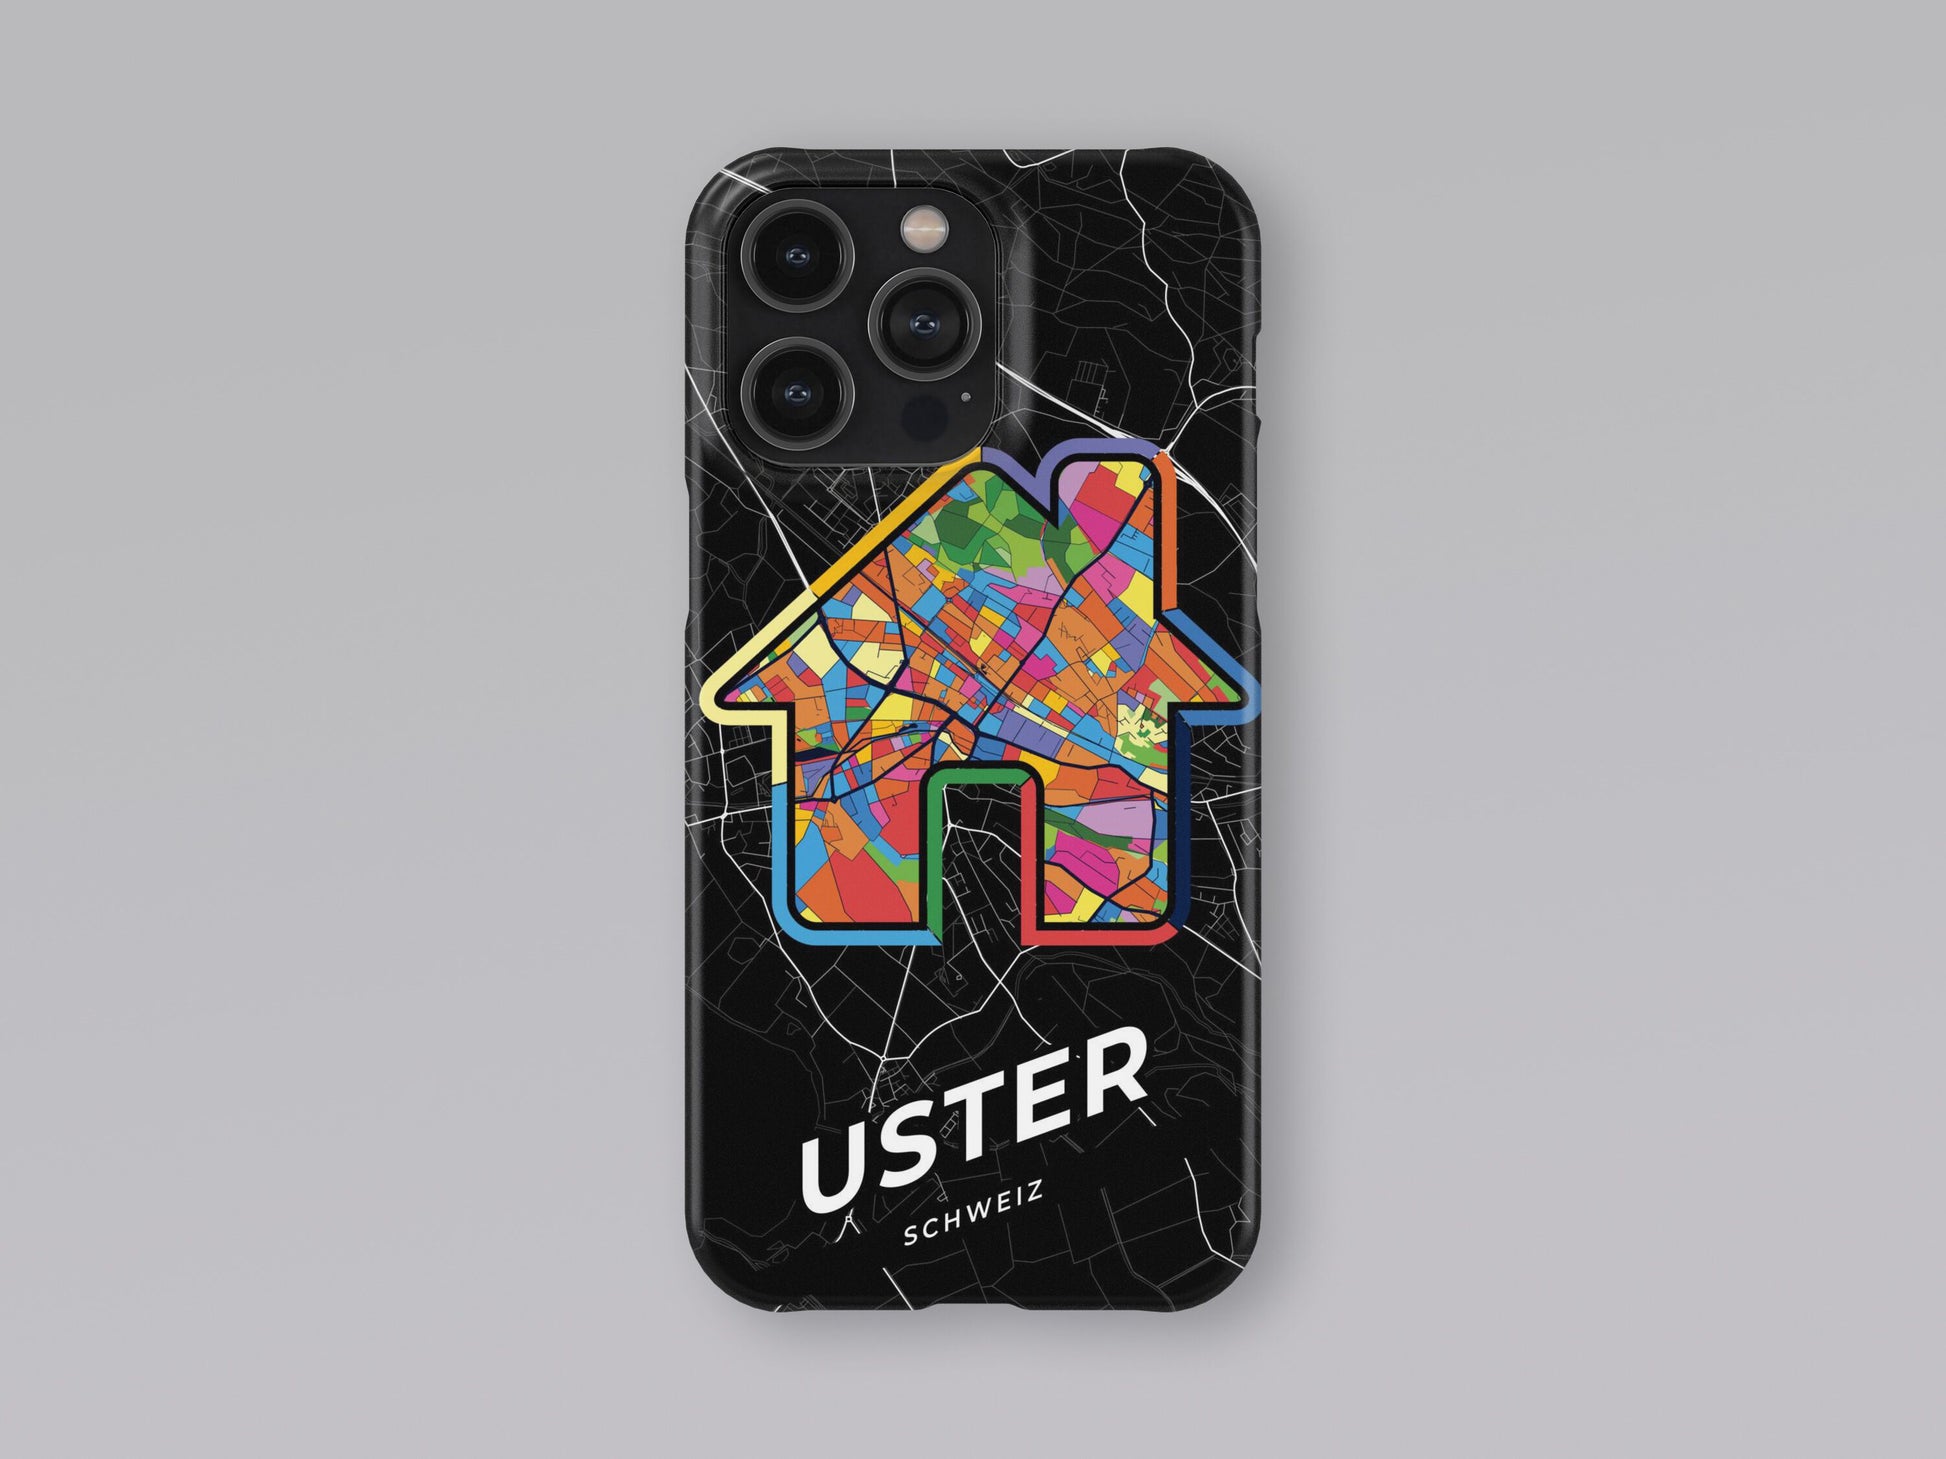 Uster Switzerland slim phone case with colorful icon 3